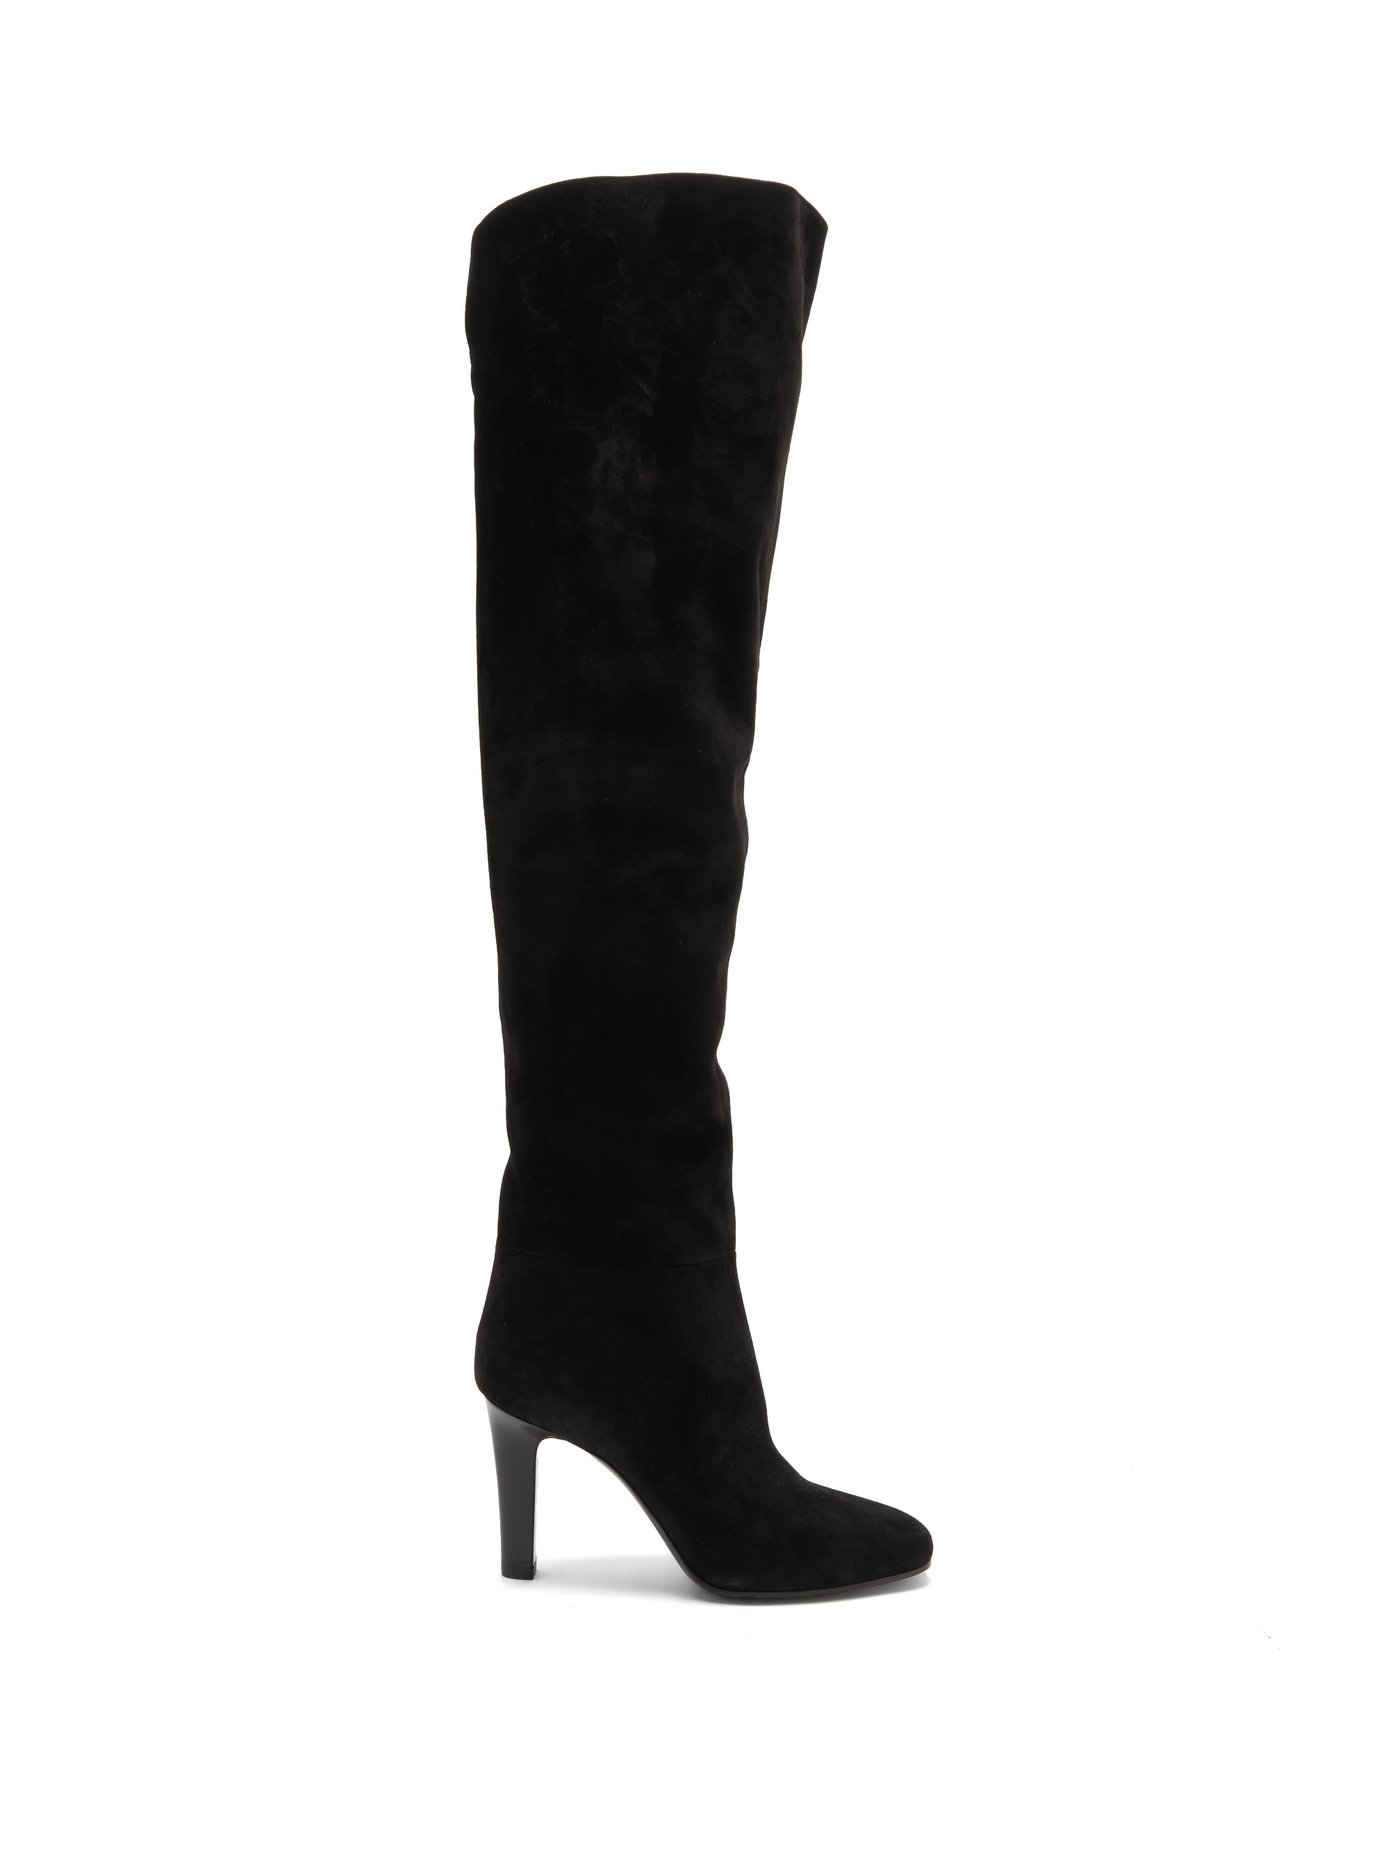 ysl over the knee boots